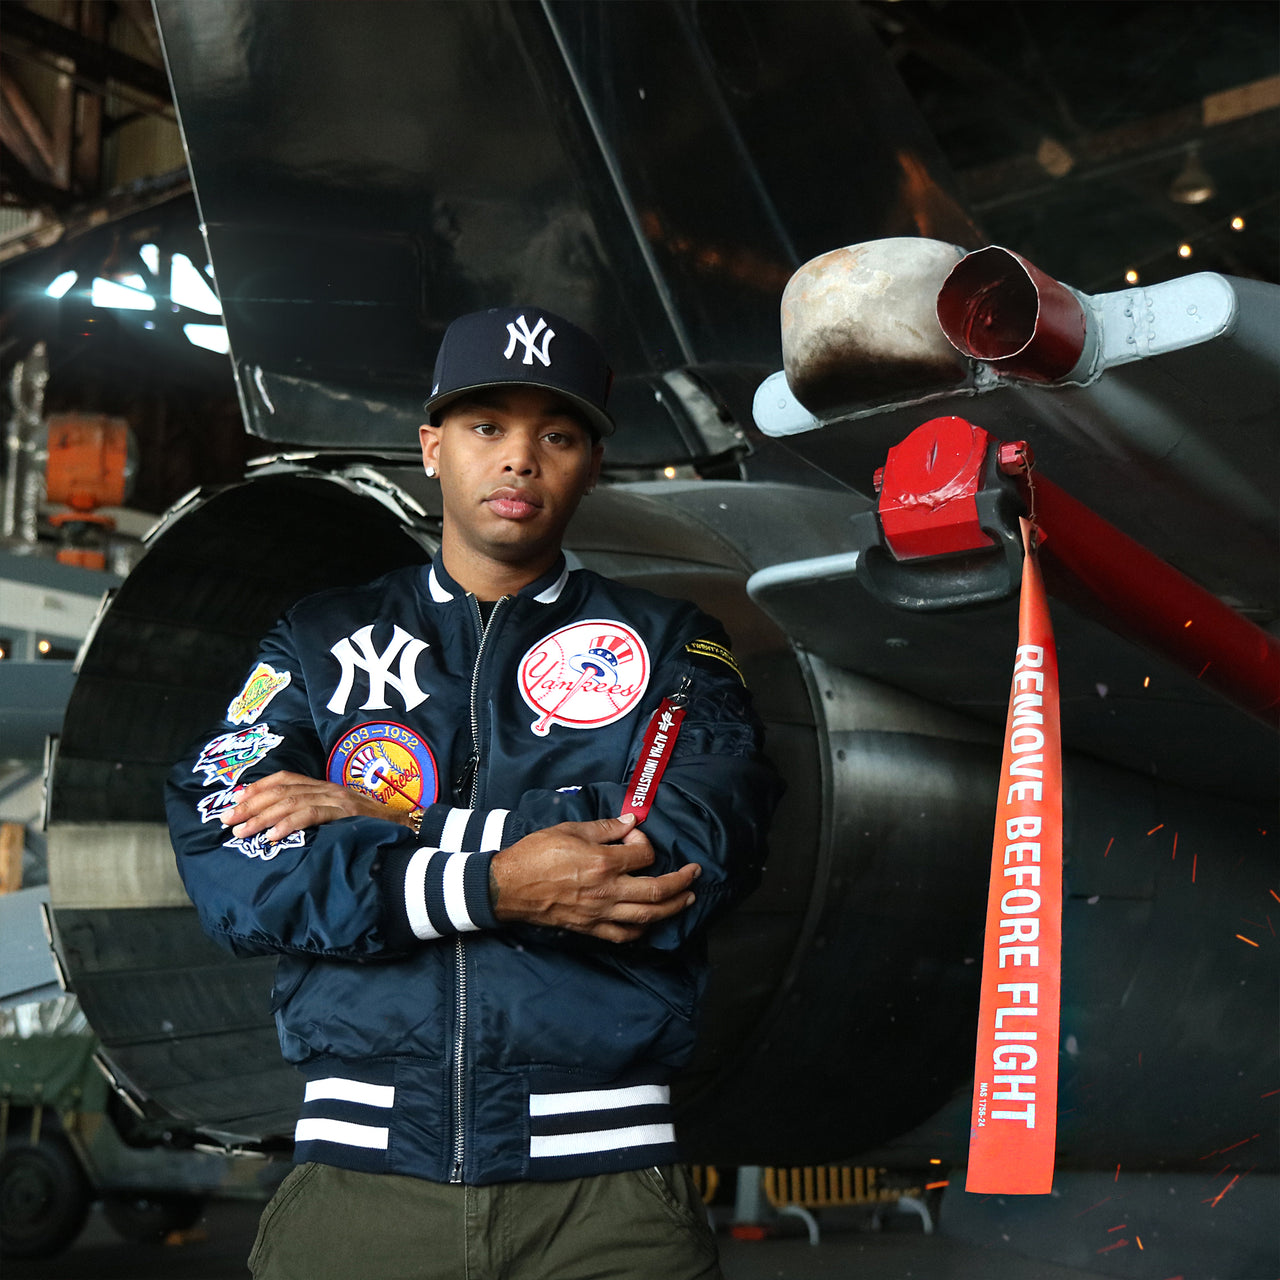 The New York Yankees MLB Patch Alpha Industries Reversible Bomber Jacket With Camo Liner | Navy Blue Bomber Jacket behind a jet